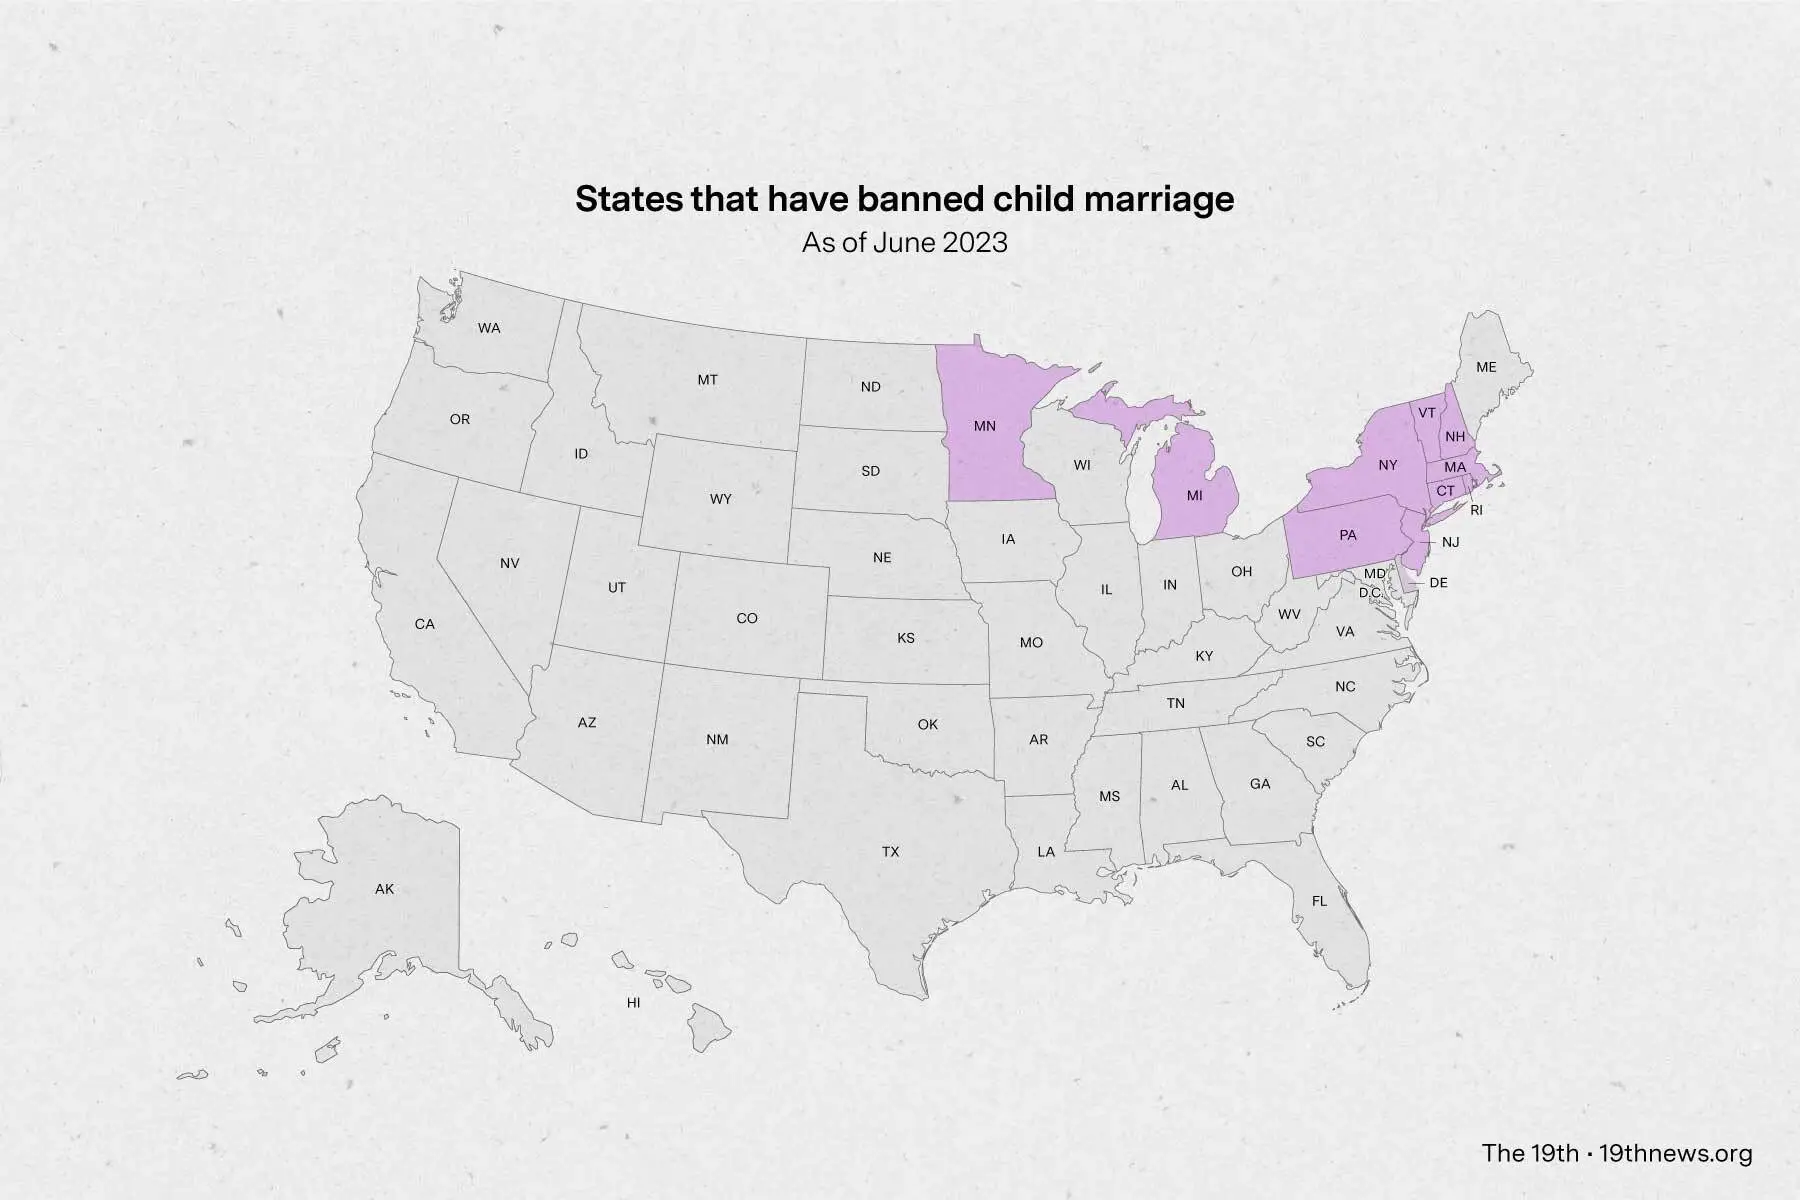 Child marriage is still prevalent in the